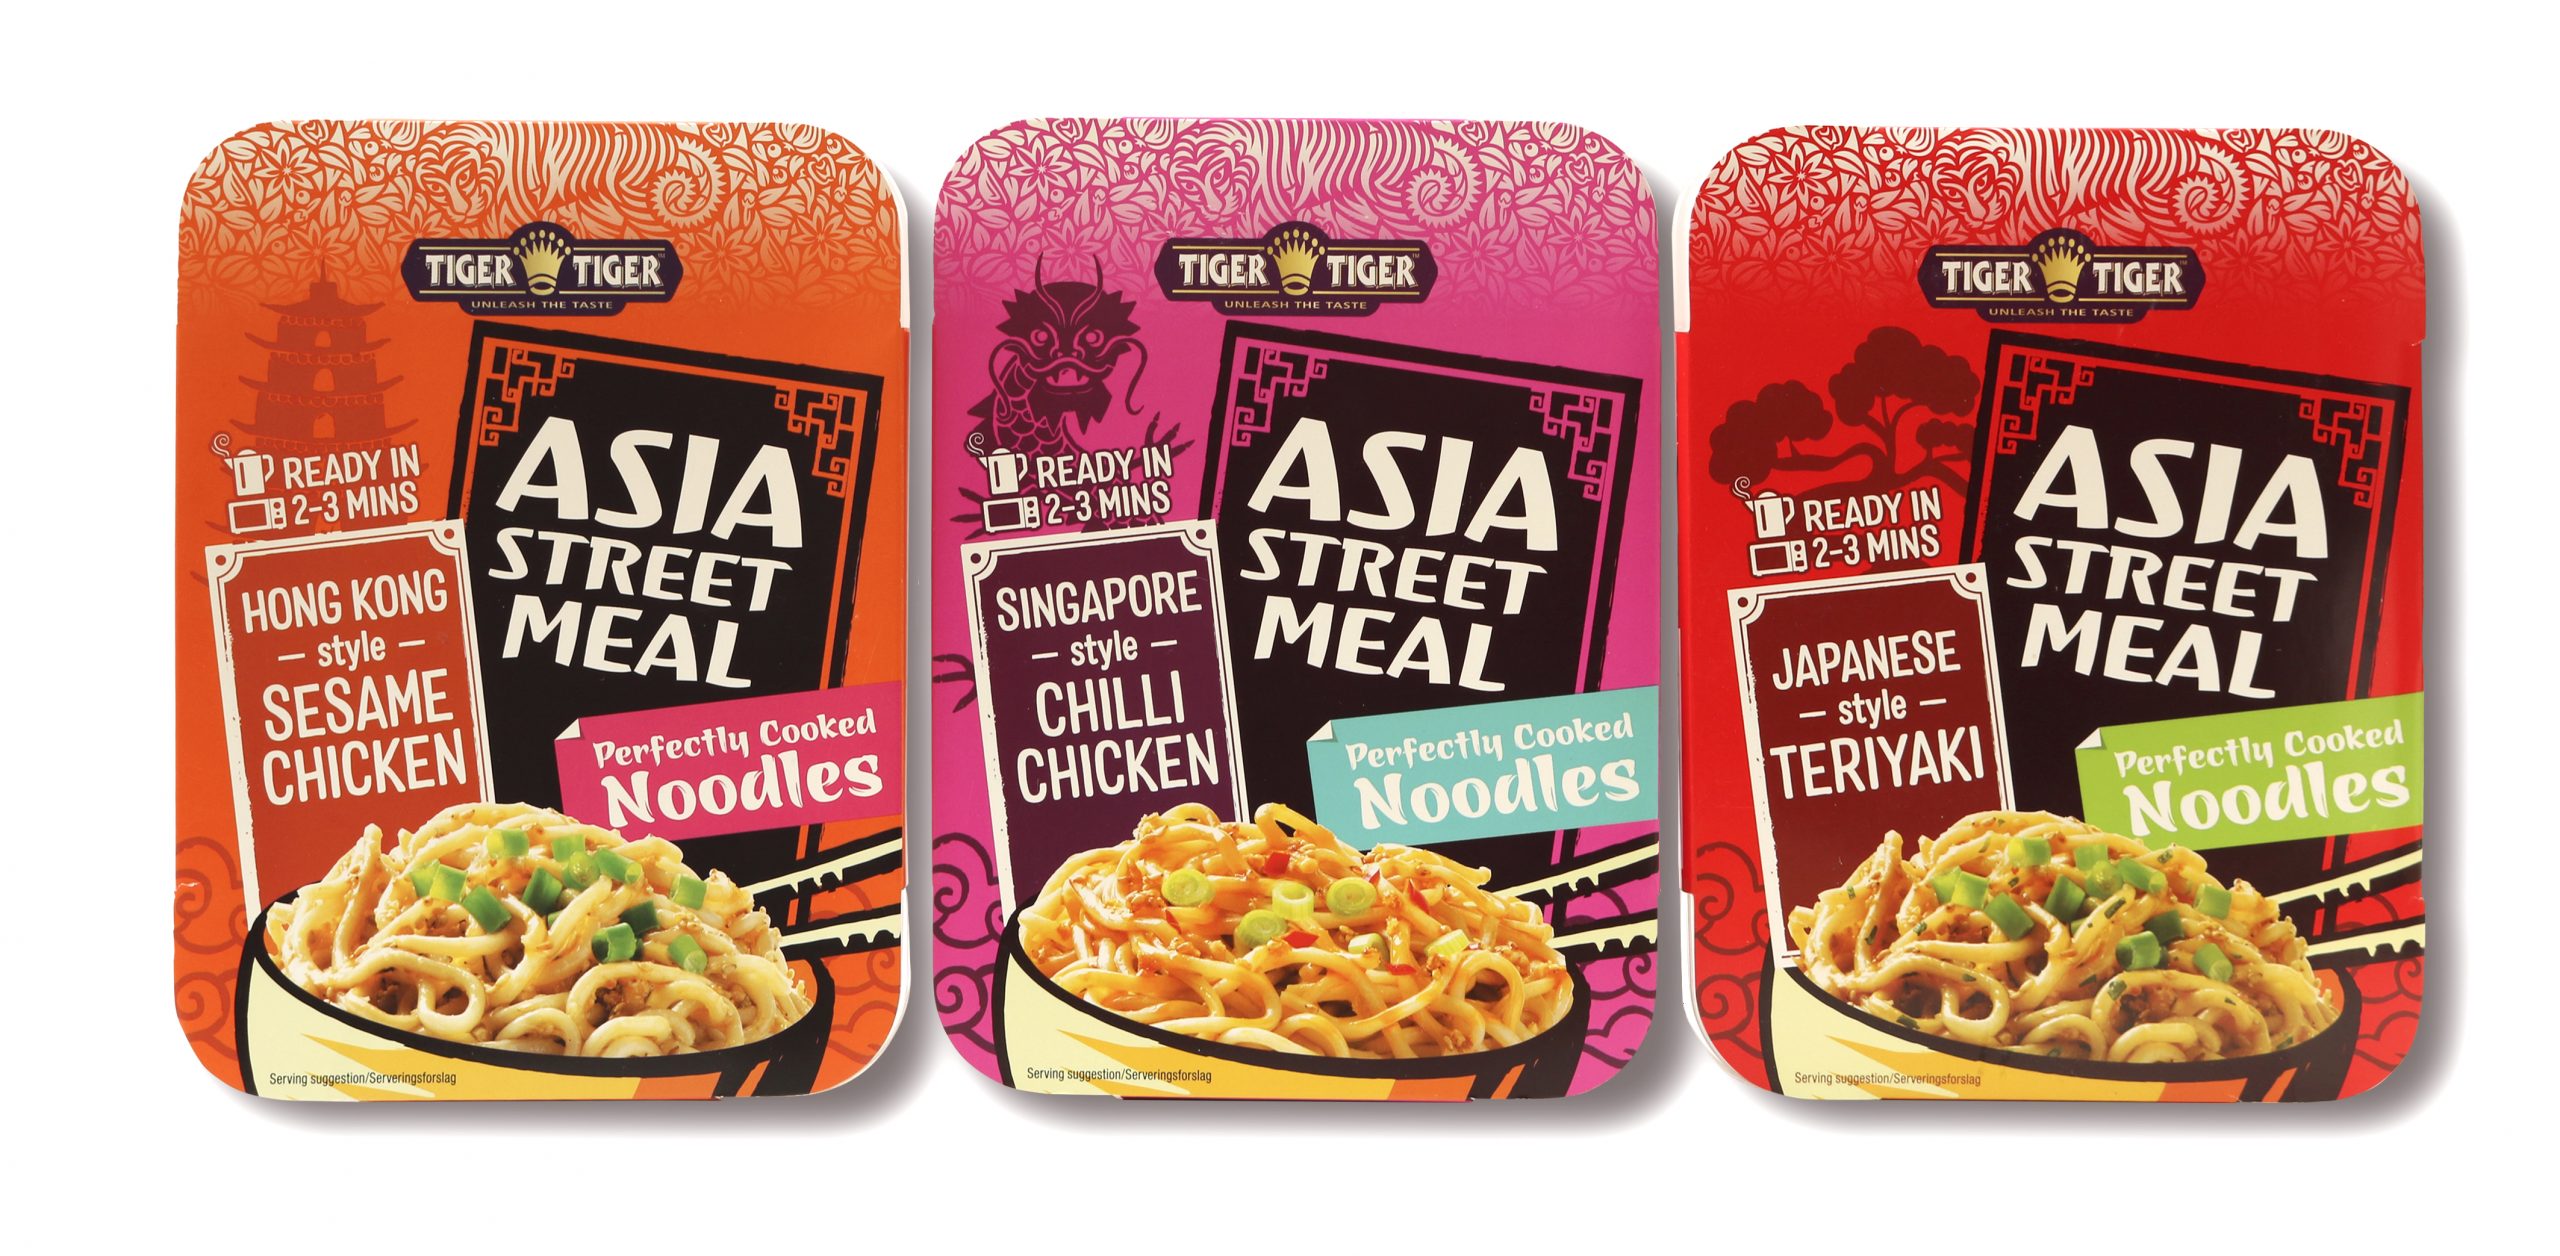 Tiger Tiger unveils new Asia Street Meals